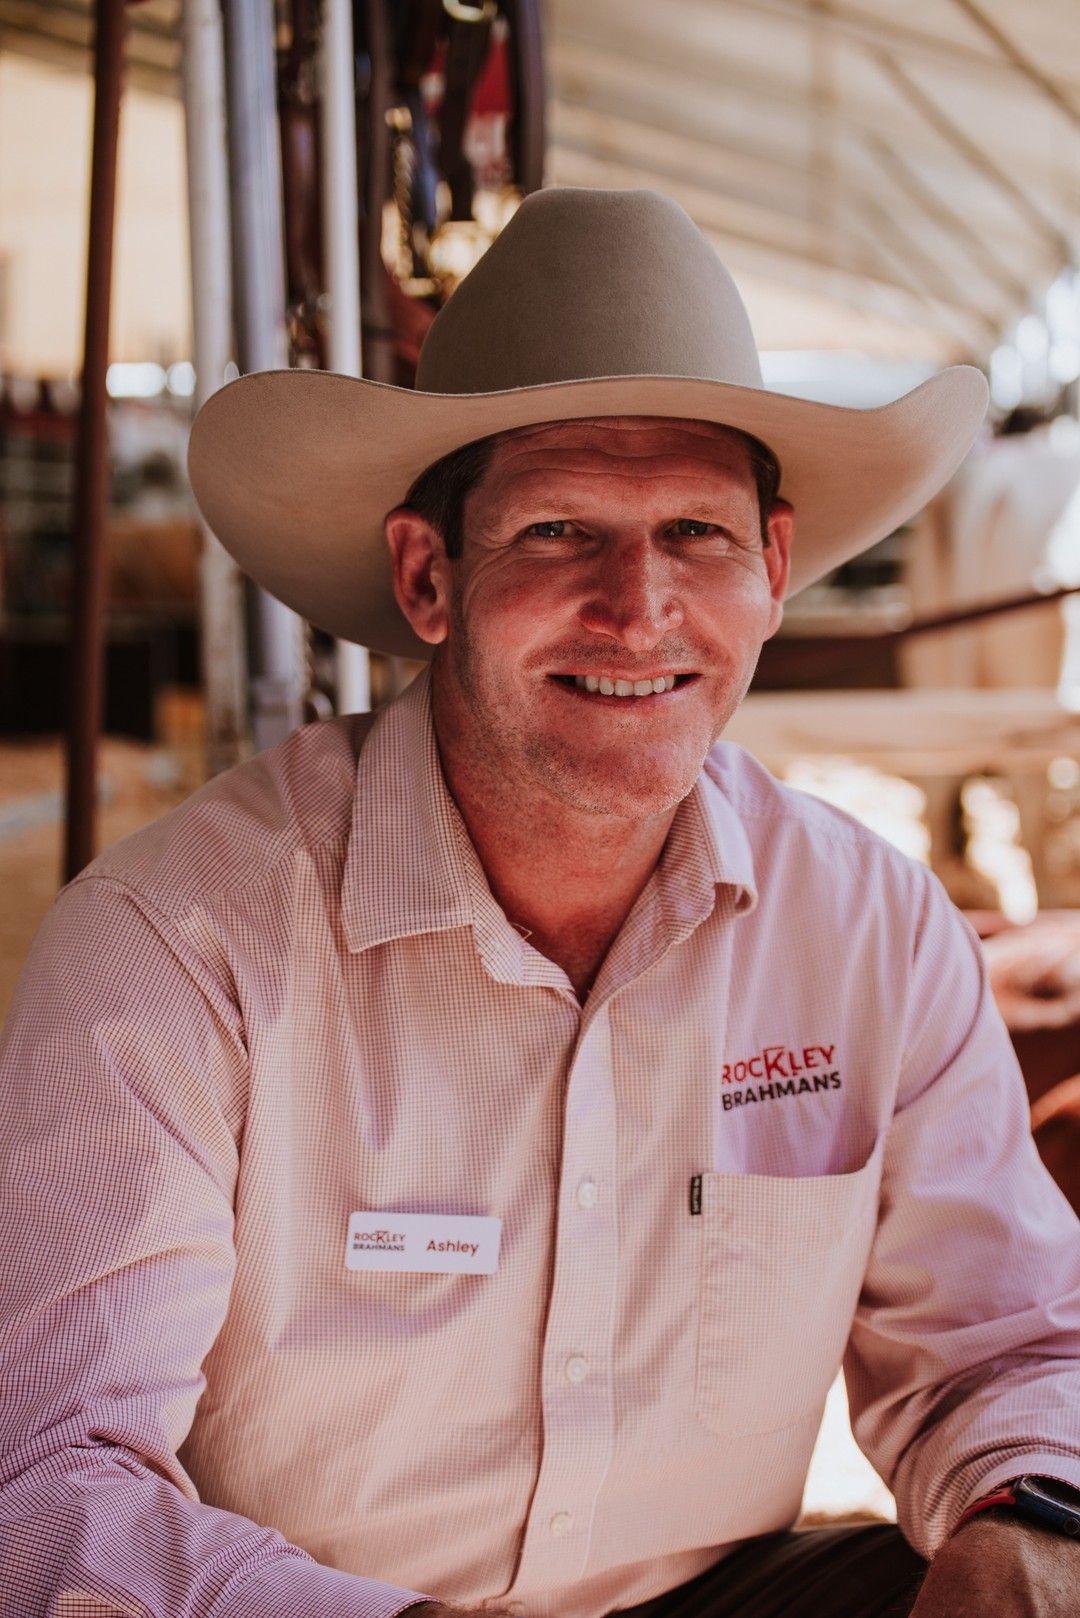 Best of Beef24 | Ashley Kirk, Rockley Br...

The cattle industry in Australia is rich in history and tradition. Many families in the beef industry find themselves returning to Beef Australia year after year with better cattle and improved bloodlines. We caught up with Ashley Kirk from @rockleybrahmans - whose stud is this year celebrating 70 years of breeding Red Brahmans. 

#RBSellars #Beef24 #BeefAustralia